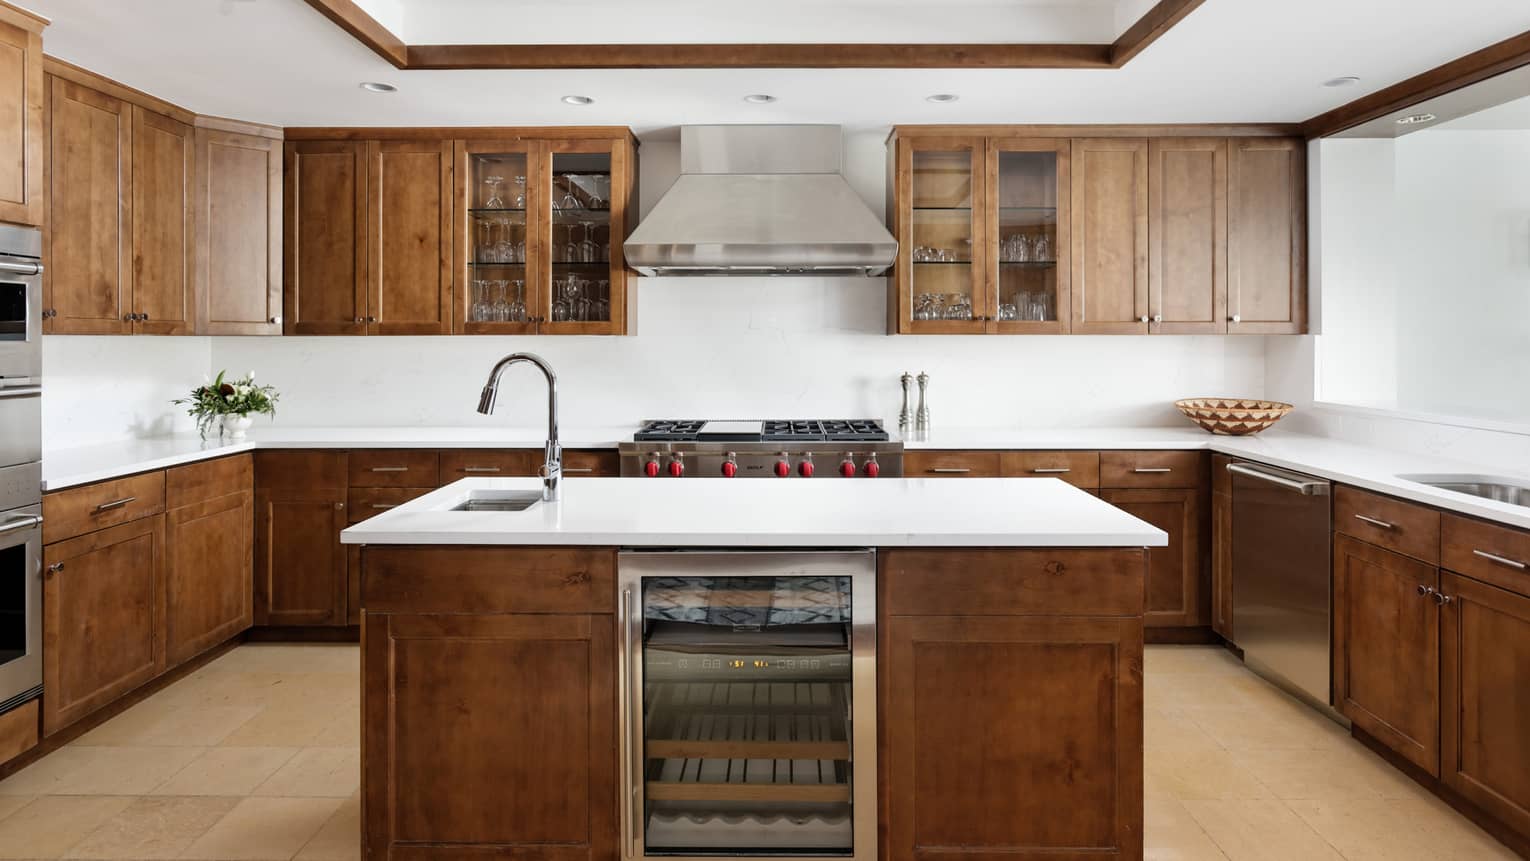 Kitchen with dark wood cupboards and white countertops, island with built-in wine fridge and sink